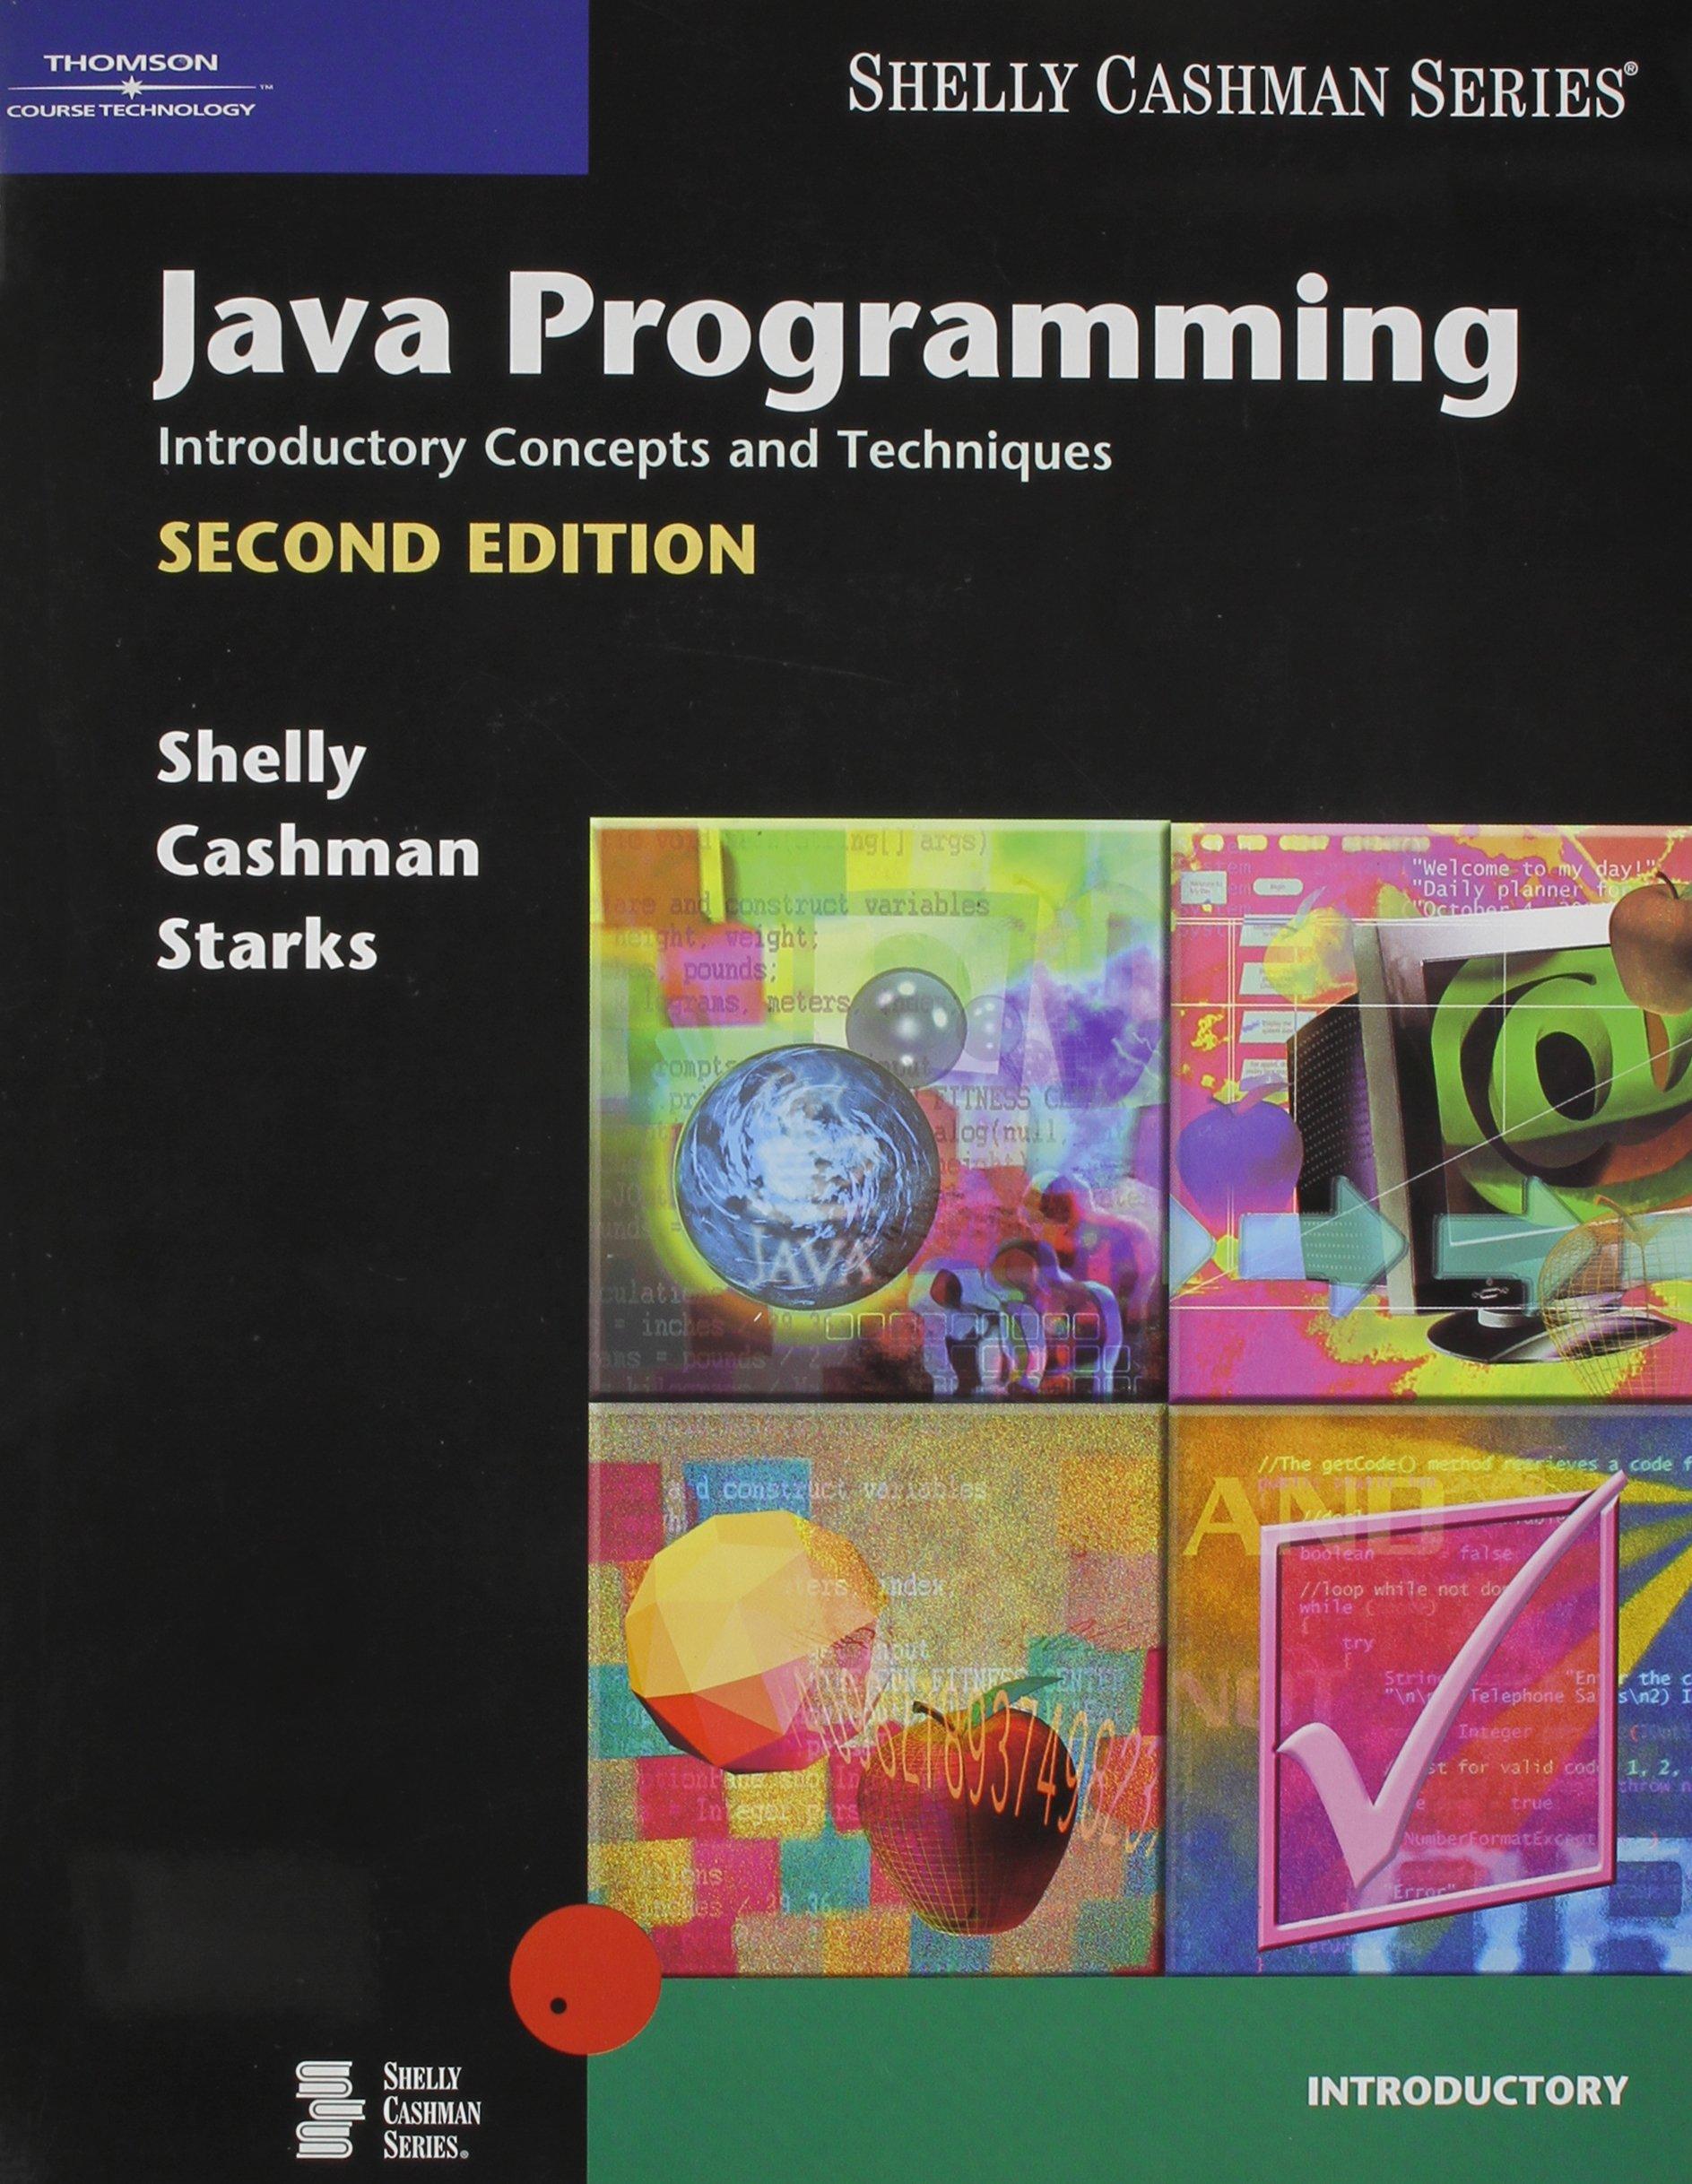 java programming introductory concepts and techniques 2nd edition gary b. shelly, thomas j. cashman, joy l.